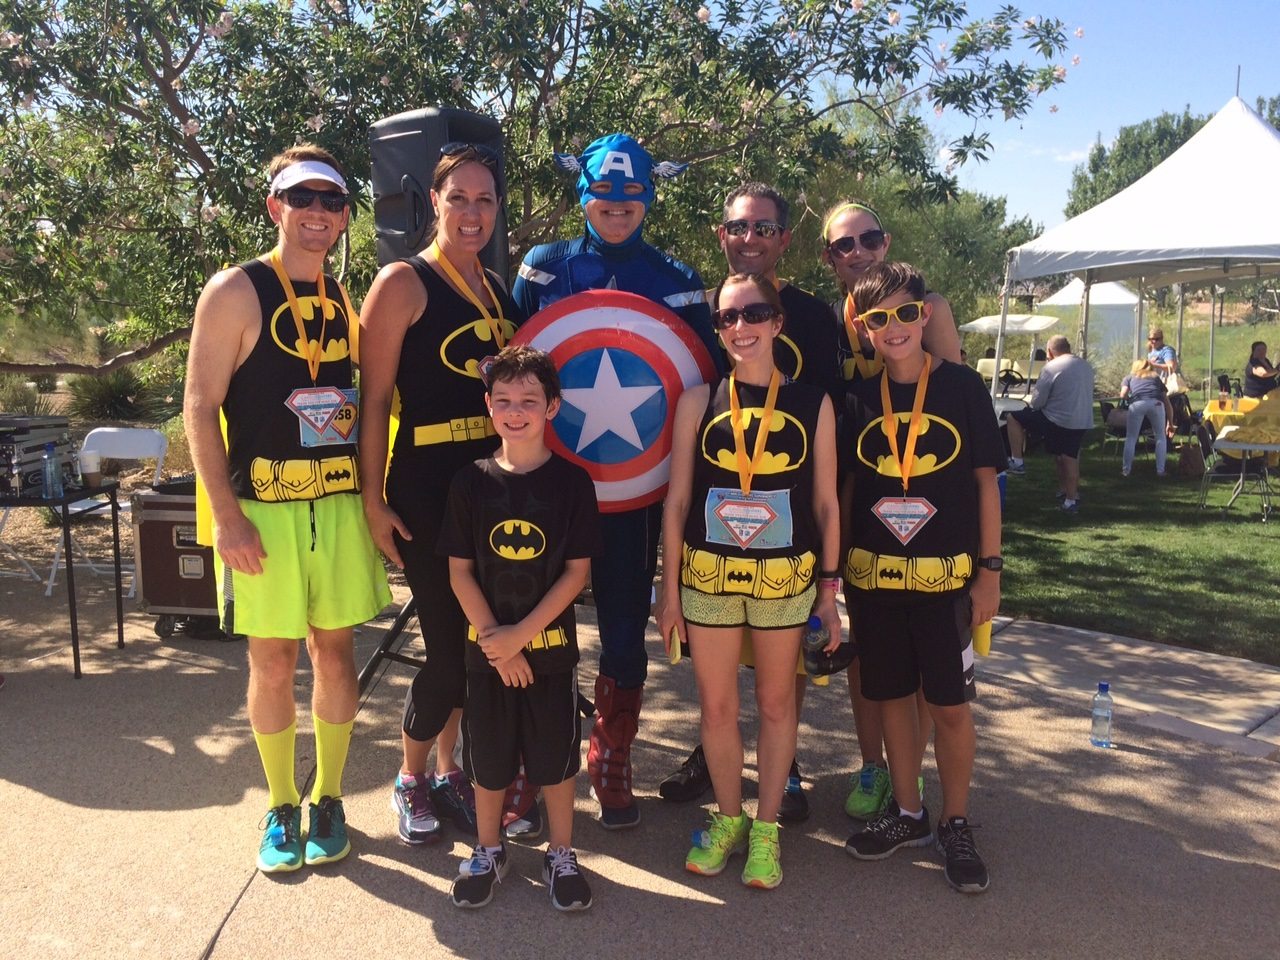 More than $200,000 was raised for children with cancer at the Superhero 5K with Chet Buchanan, a record for the Candlelighters Childhood Cancer Foundation